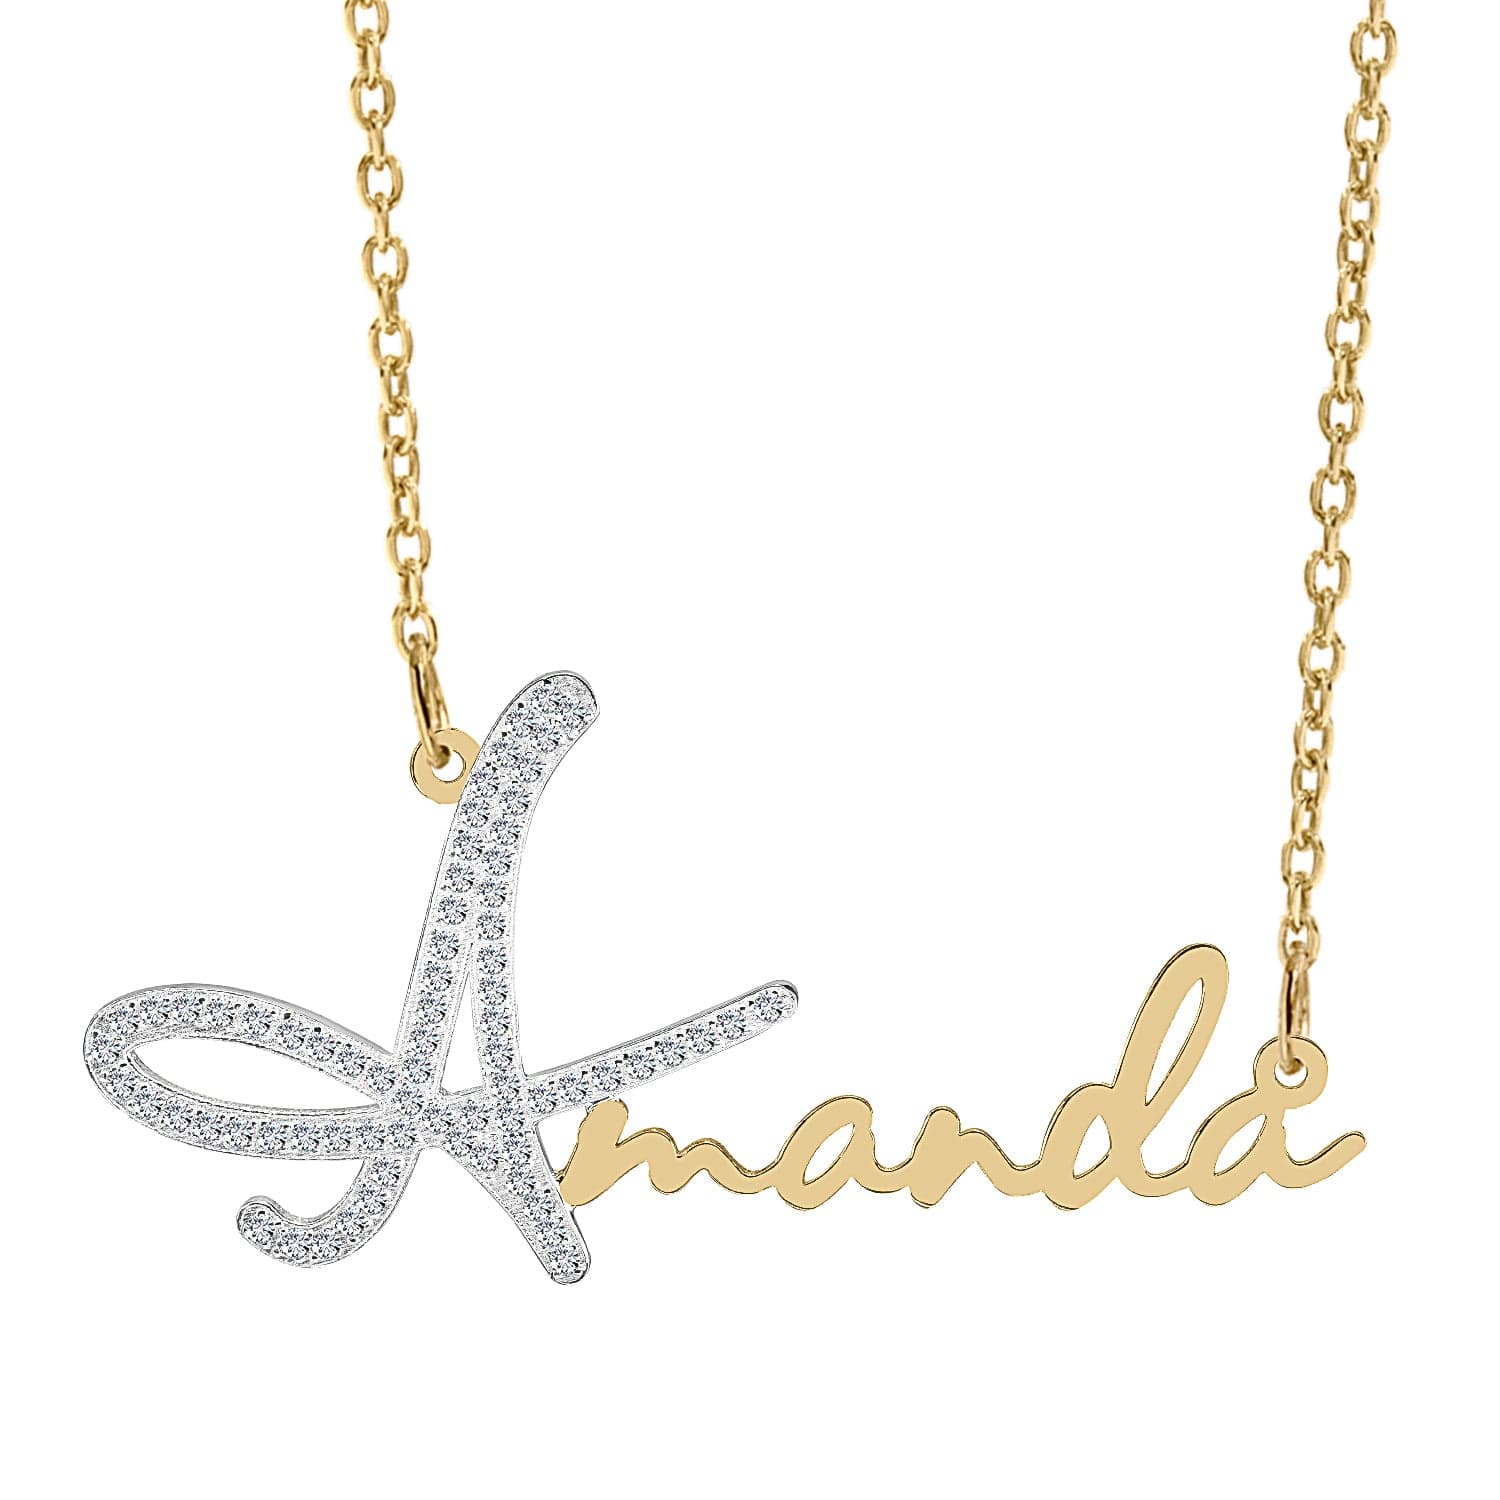 14k Gold over Sterling Silver / Link Chain Single Plated Nameplate Necklace "Amanda" with Stones